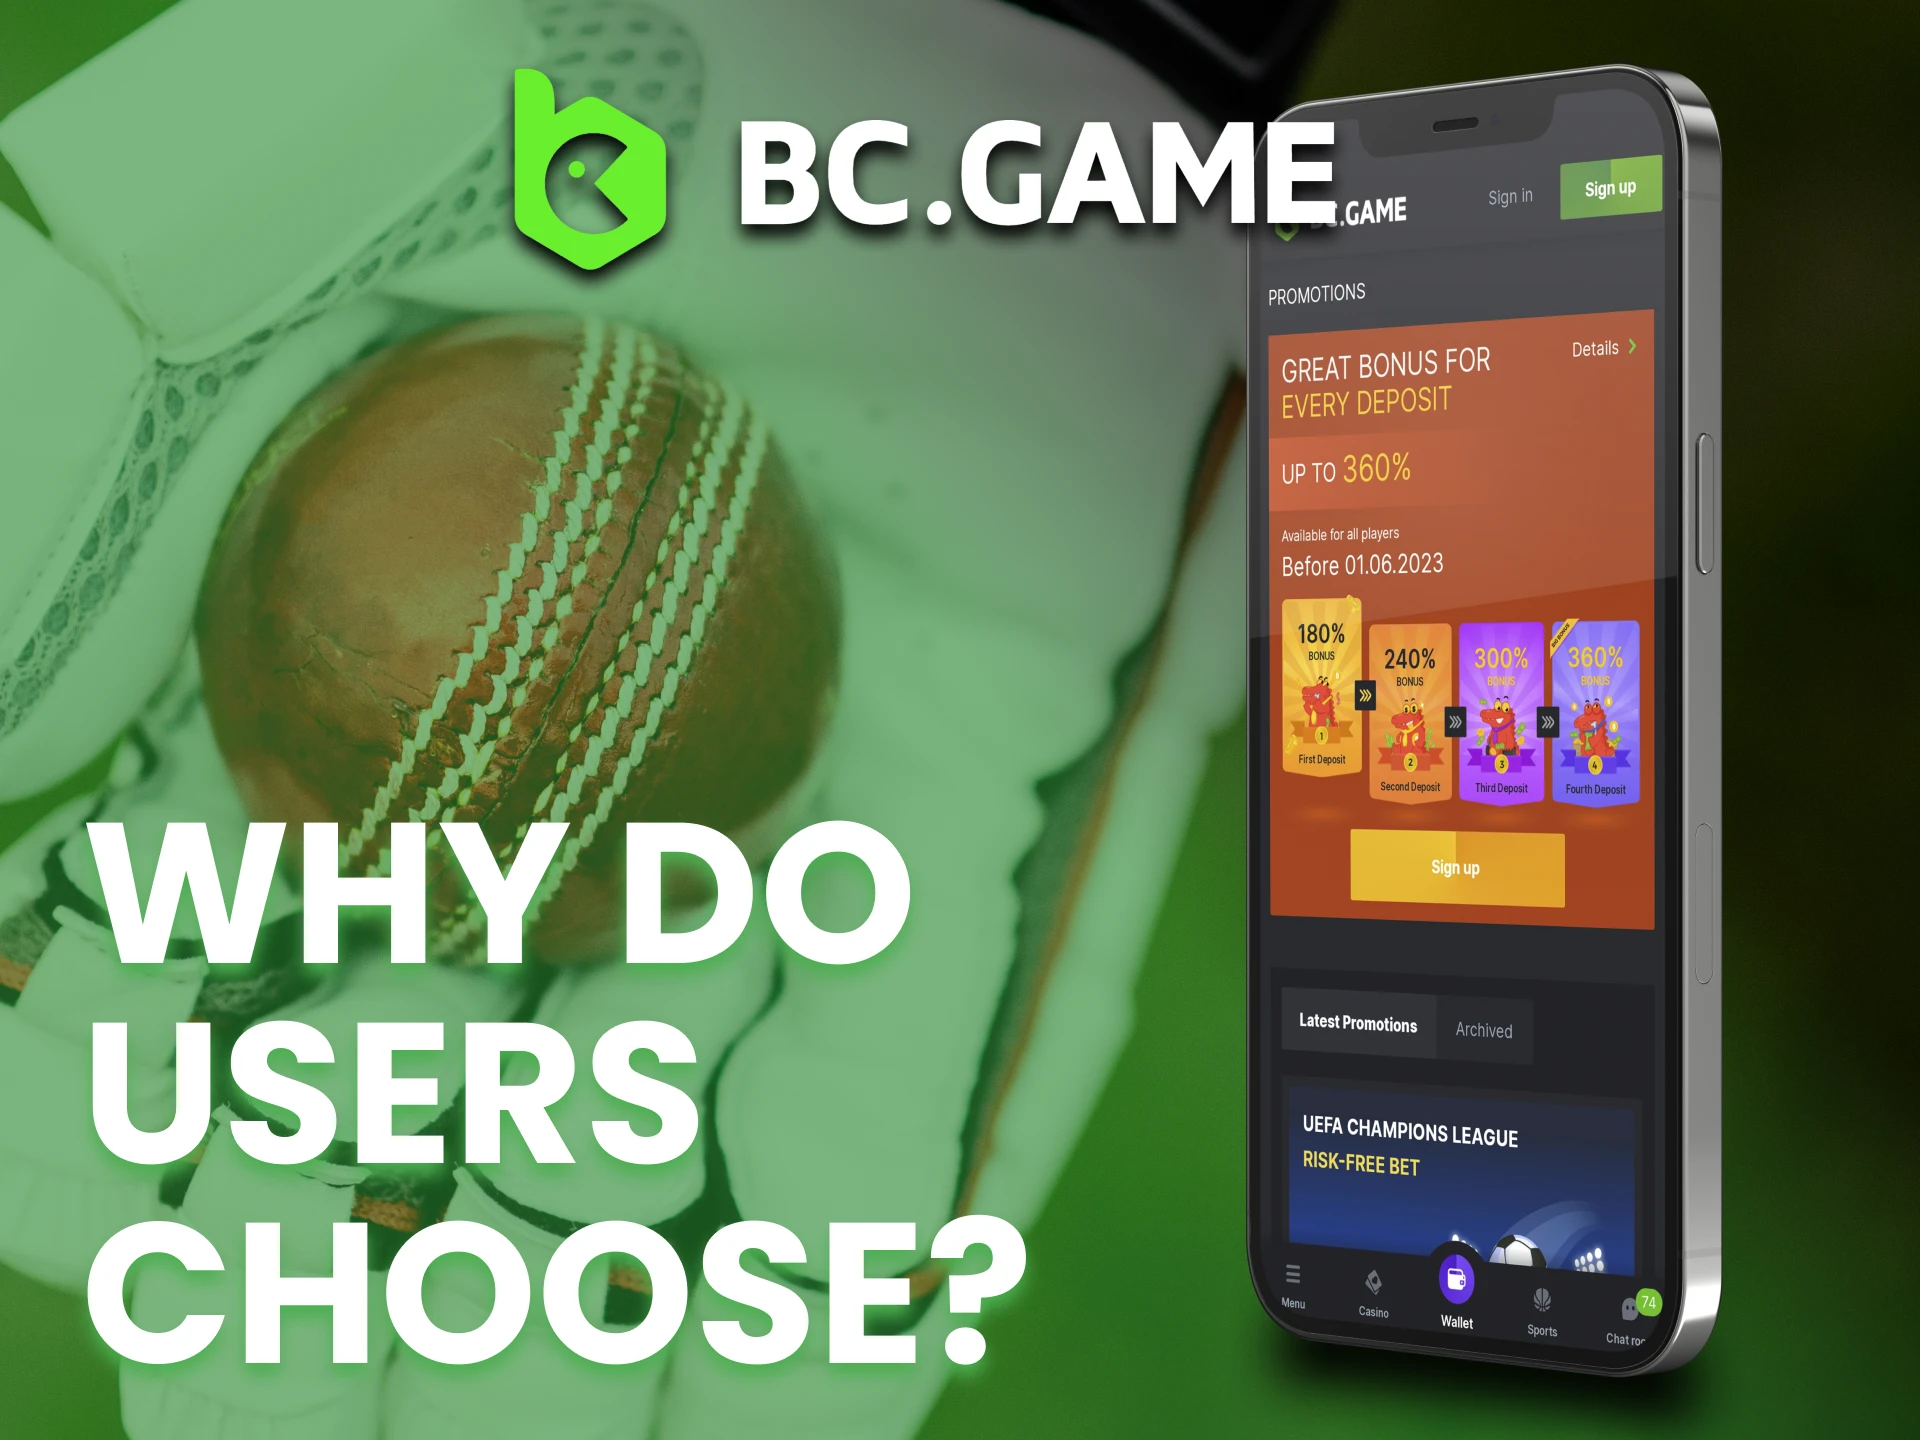 BC Game app provides additional features.